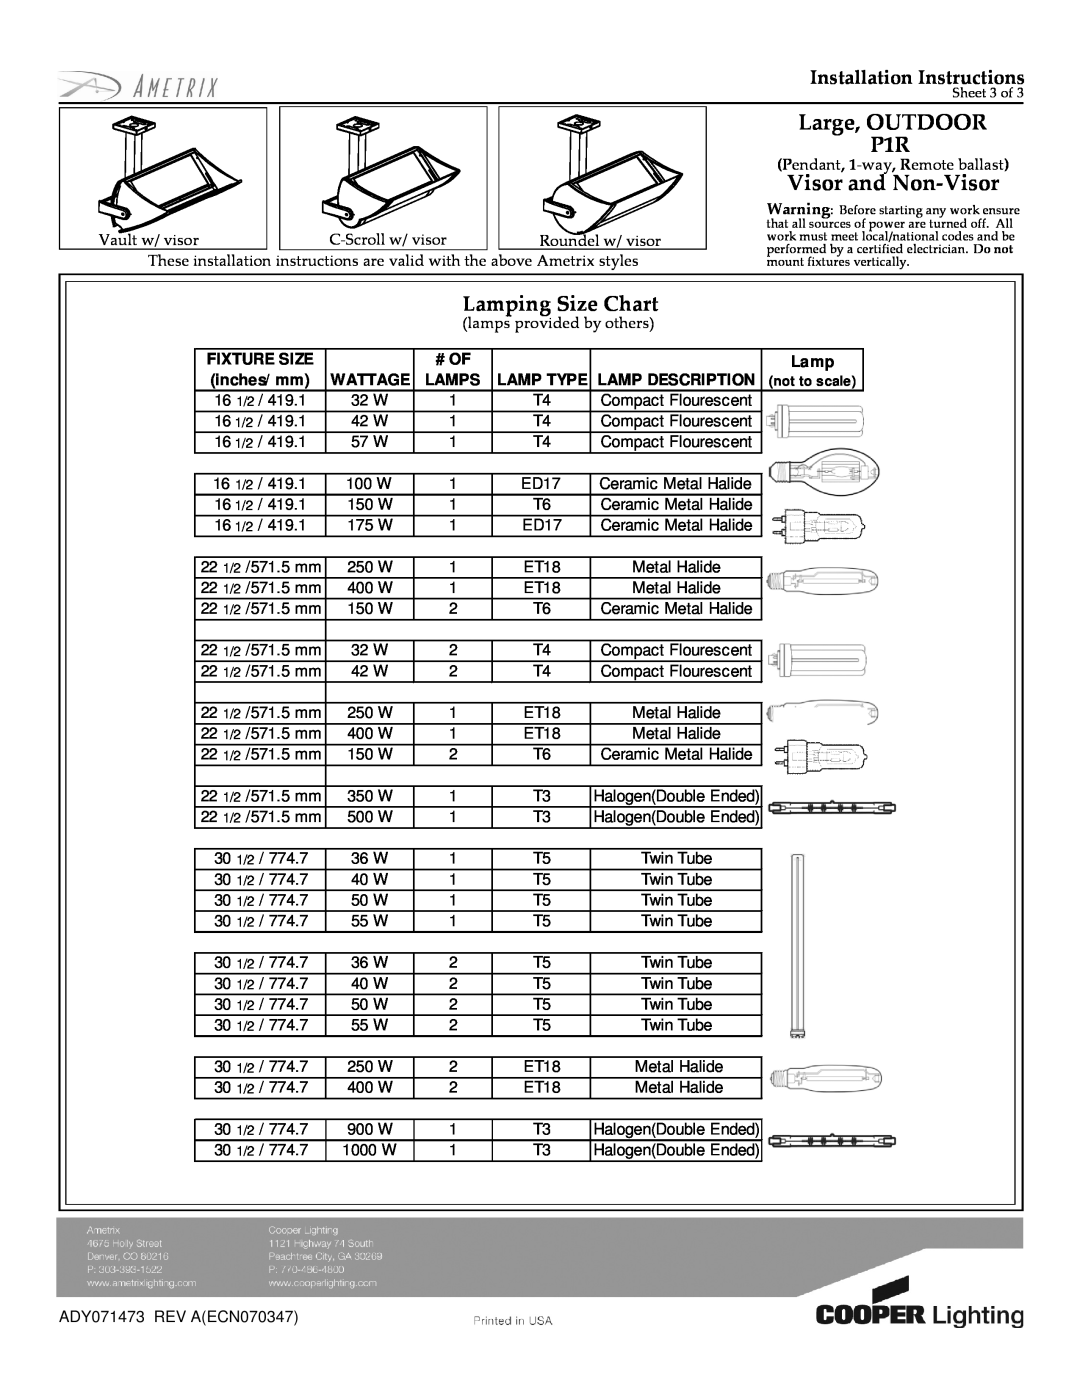 Cooper Lighting ADY071473 Lamping Size Chart, Large, OUTDOOR P1R, Visor and Non-Visor, Installation Instructions, # Of 